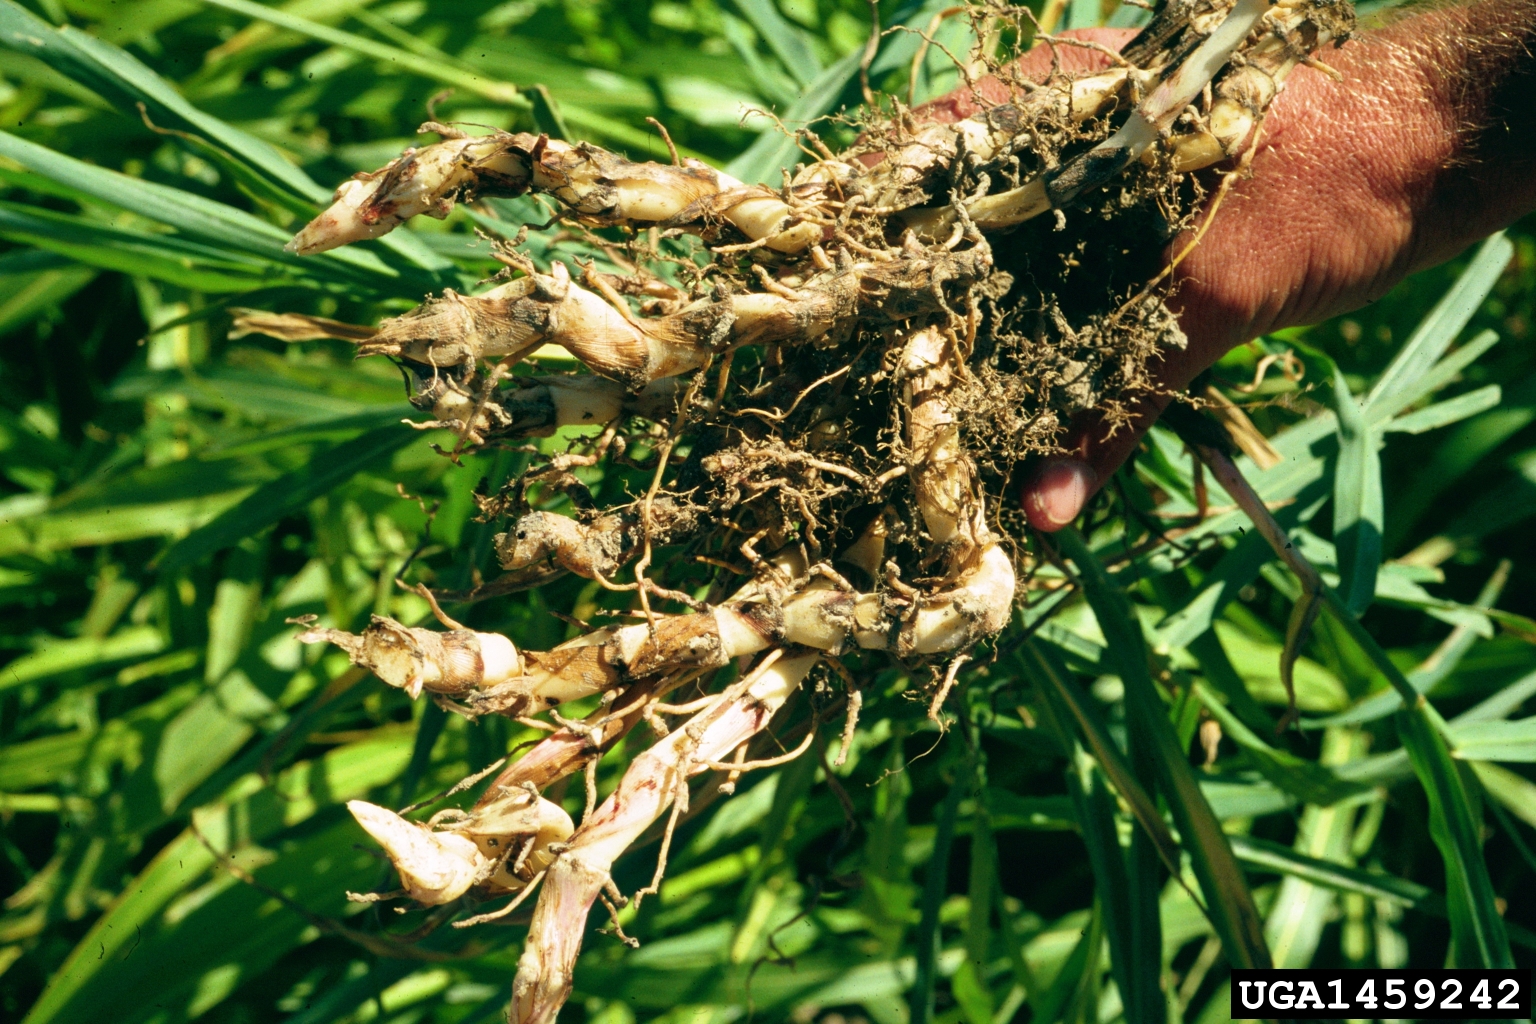 Photograph of johnsongrass that has been unrooted to show the rhizomes. In the photo, a man's hand is shown holding the base of a plant with the rhizomes facing the camera. The rhizomes are cylindrical, thick, and whitish in color, and bear many roots at their nodes.